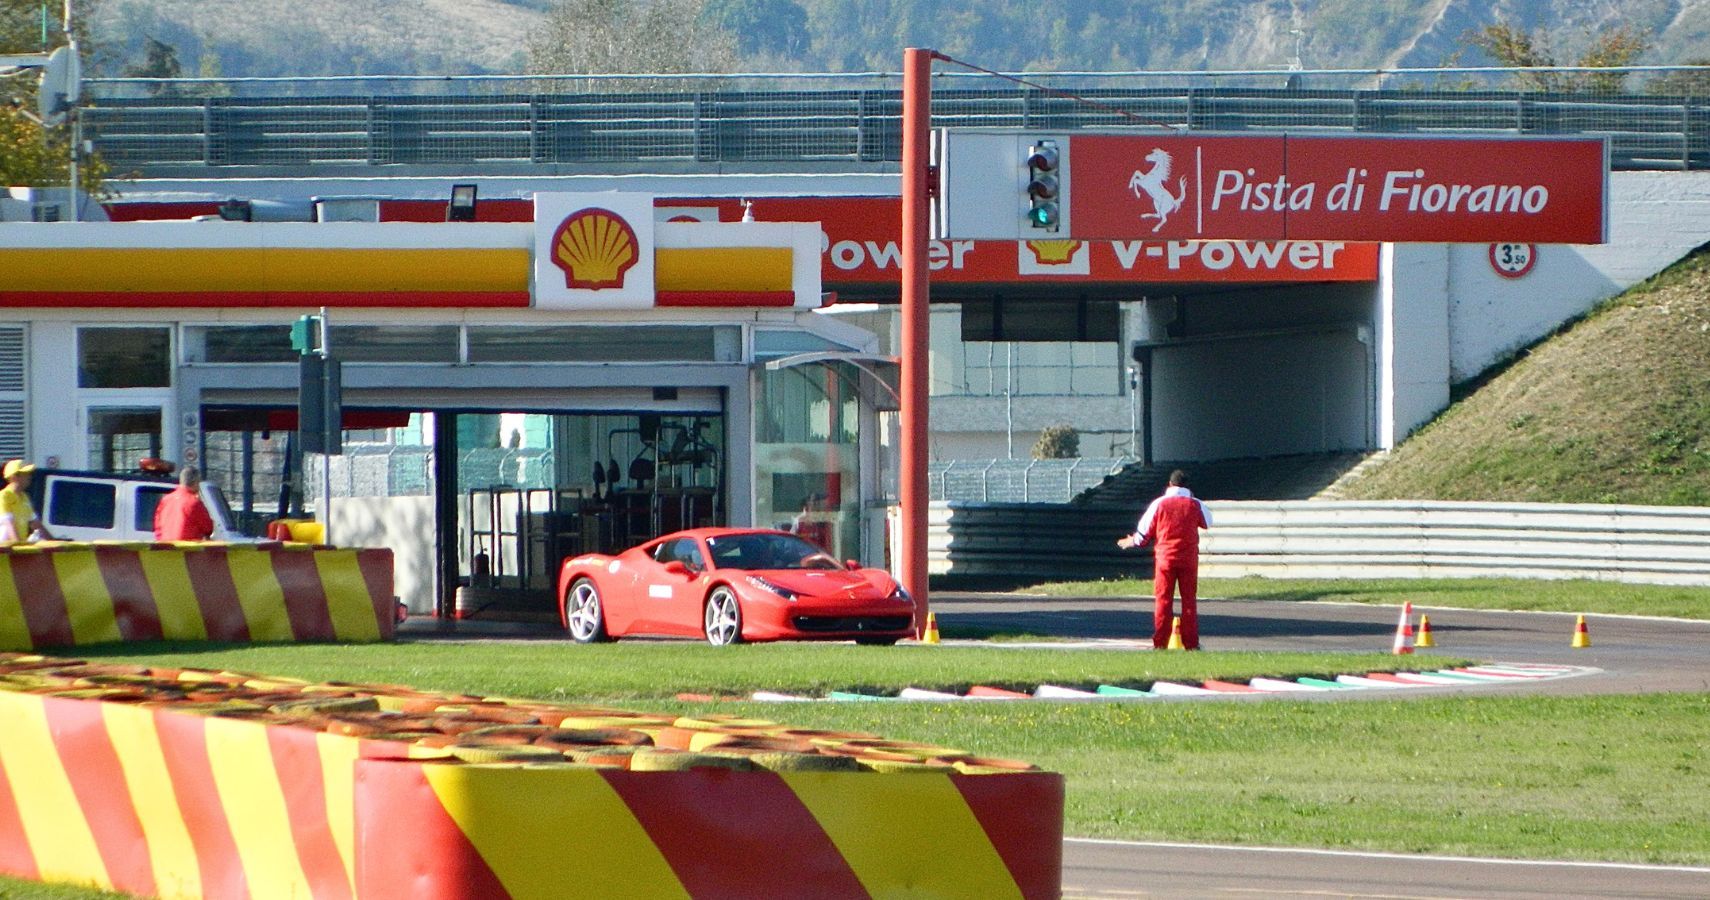 Looking at the famous pit garage at Fiorano